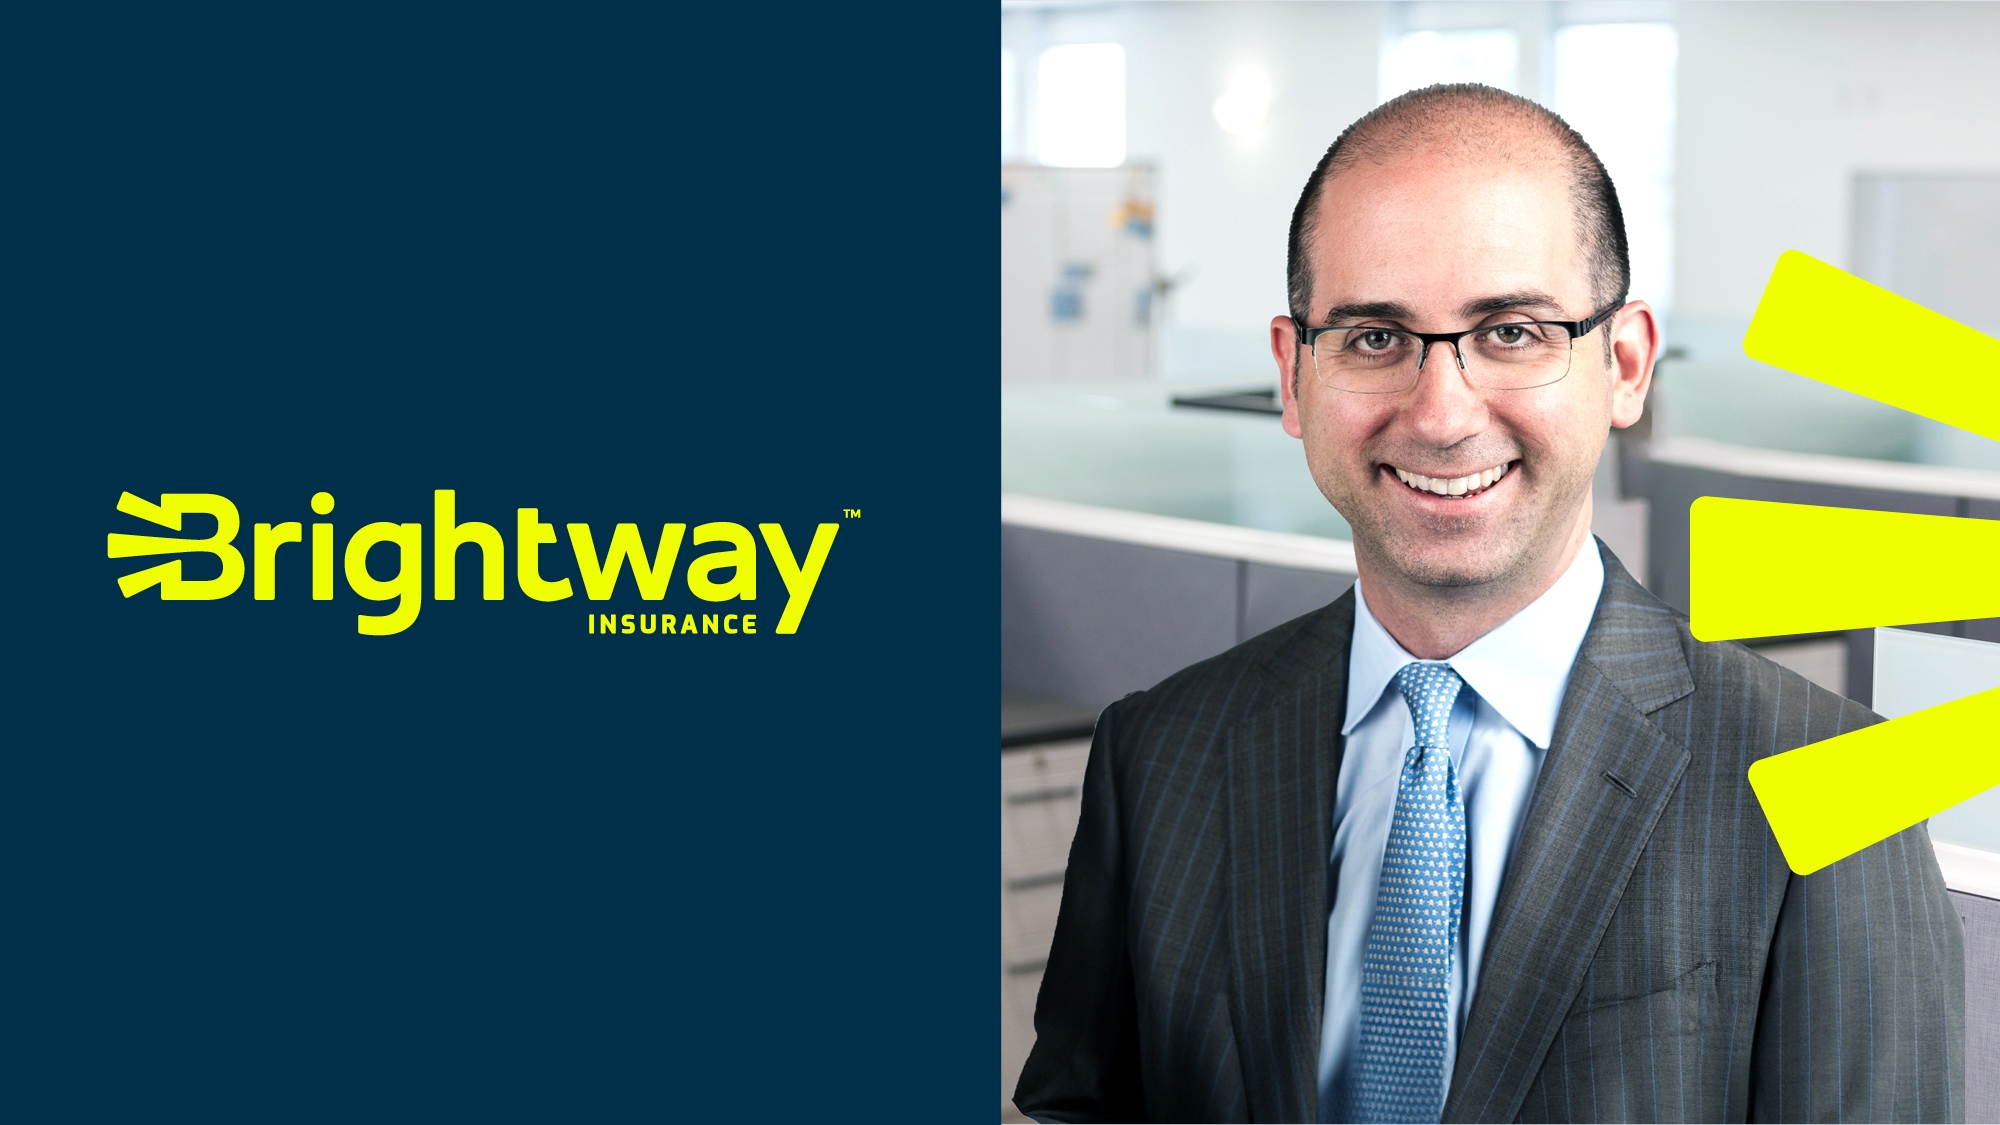 Brightway Insurance Announces the Appointment of Nick Clements as Chief Executive Officer, Rebrand, and $1.2 Billion of Gross Written Premiums in 2023